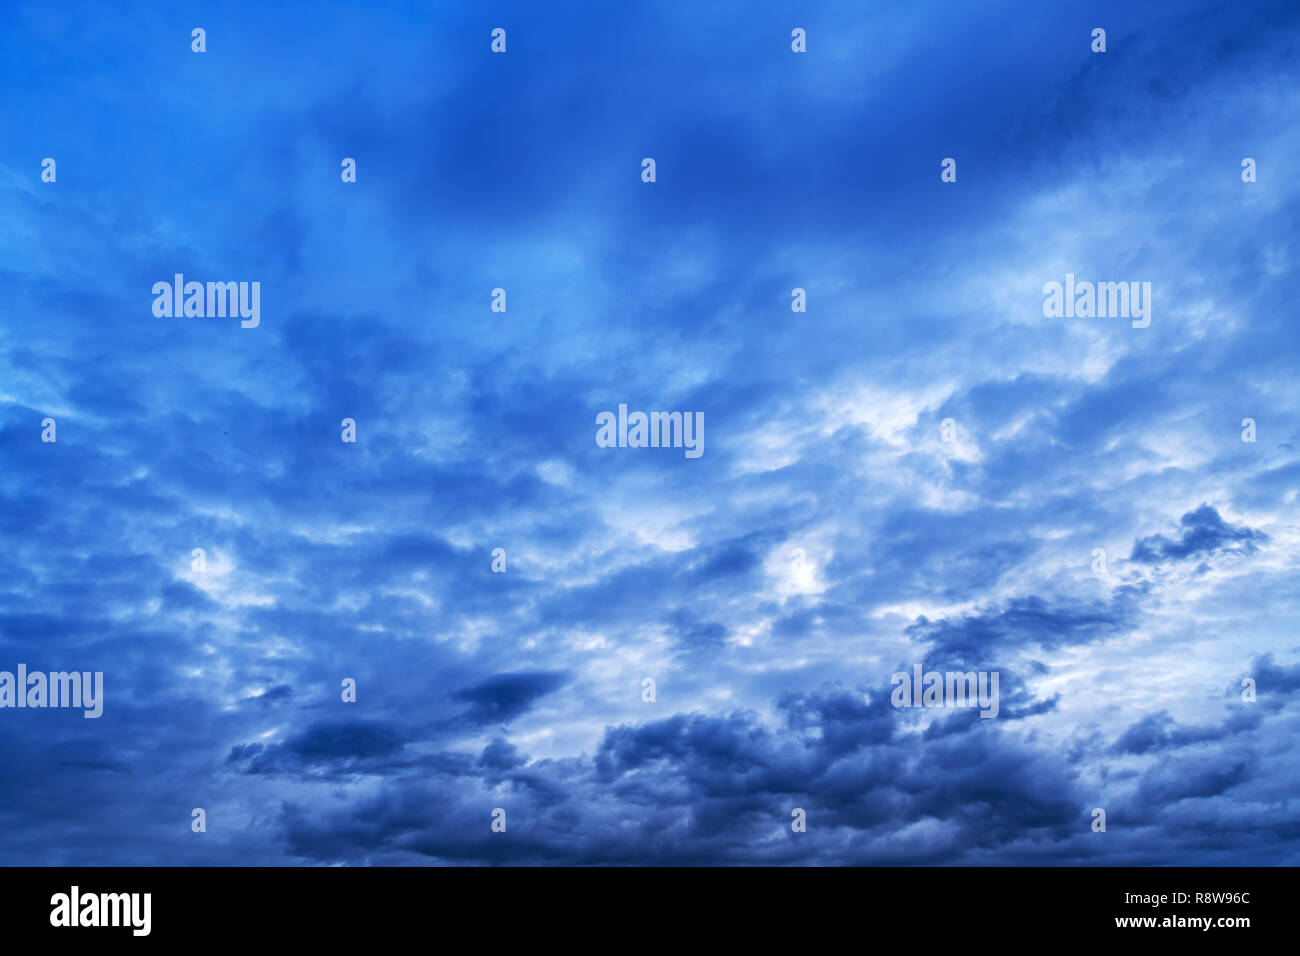 Dramatic winter sky with clouds as seasonal weather background Stock Photo